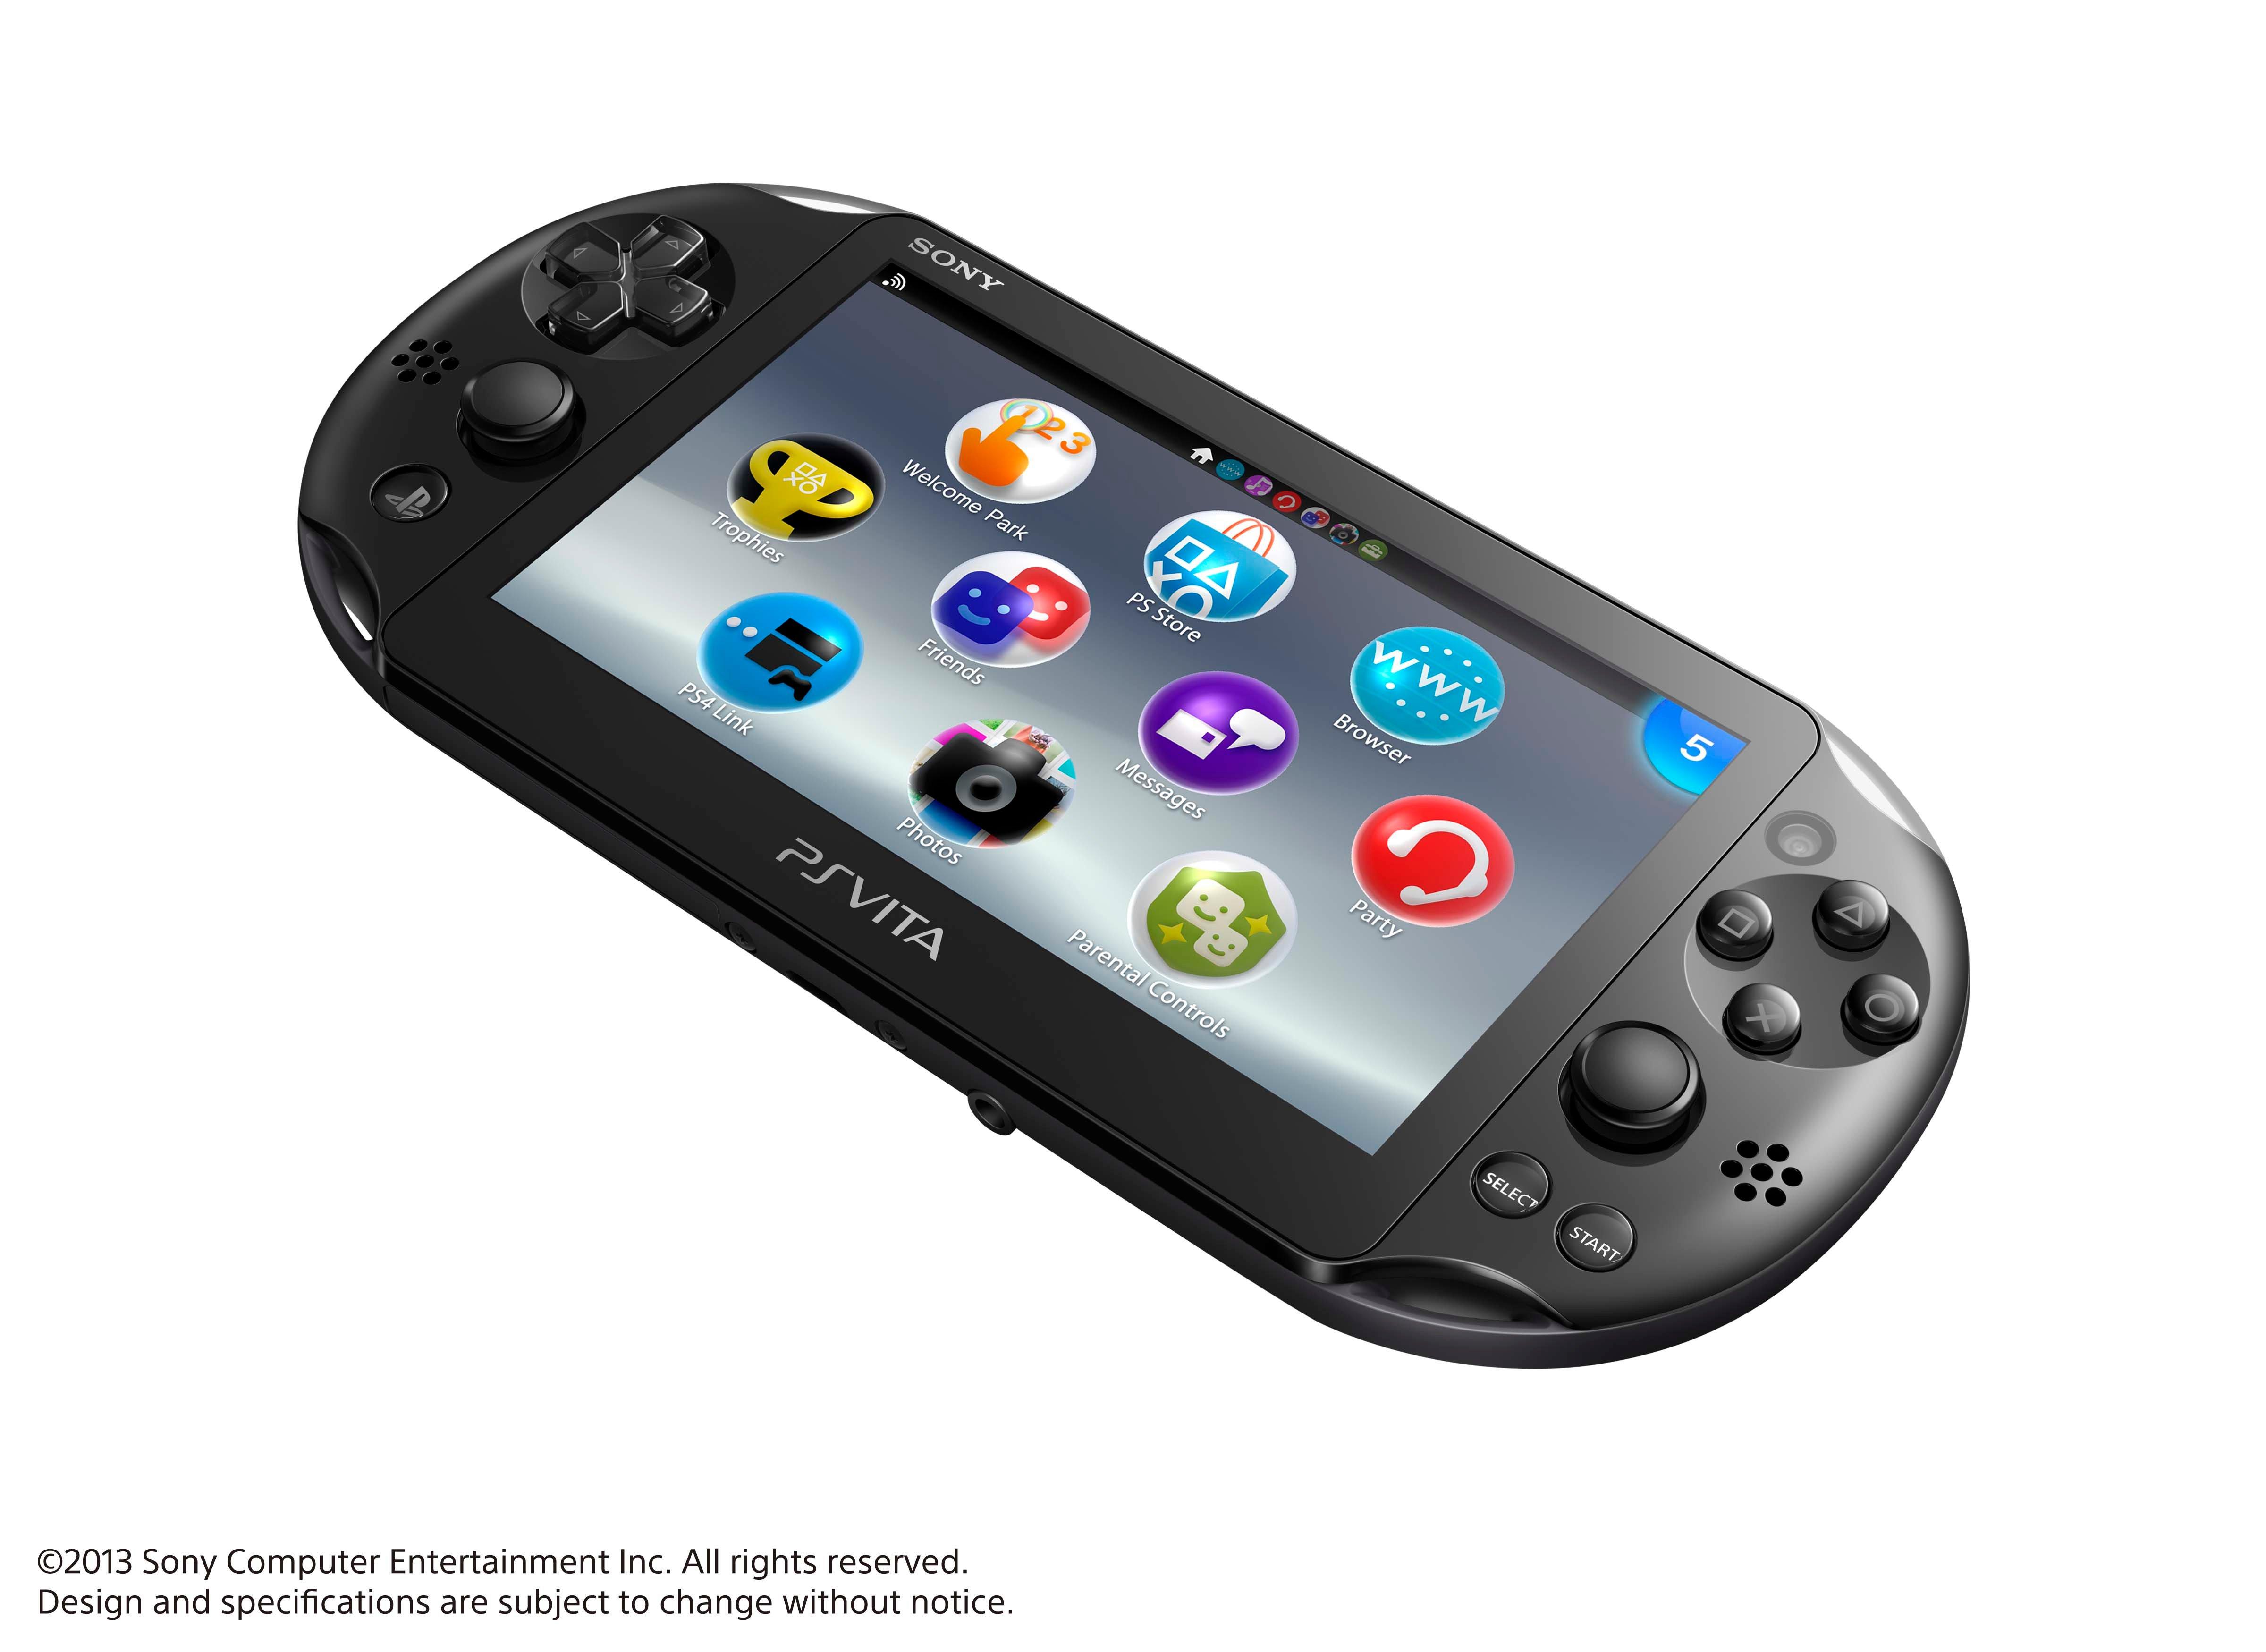 Sony PlayStation Vita Console with WiFi